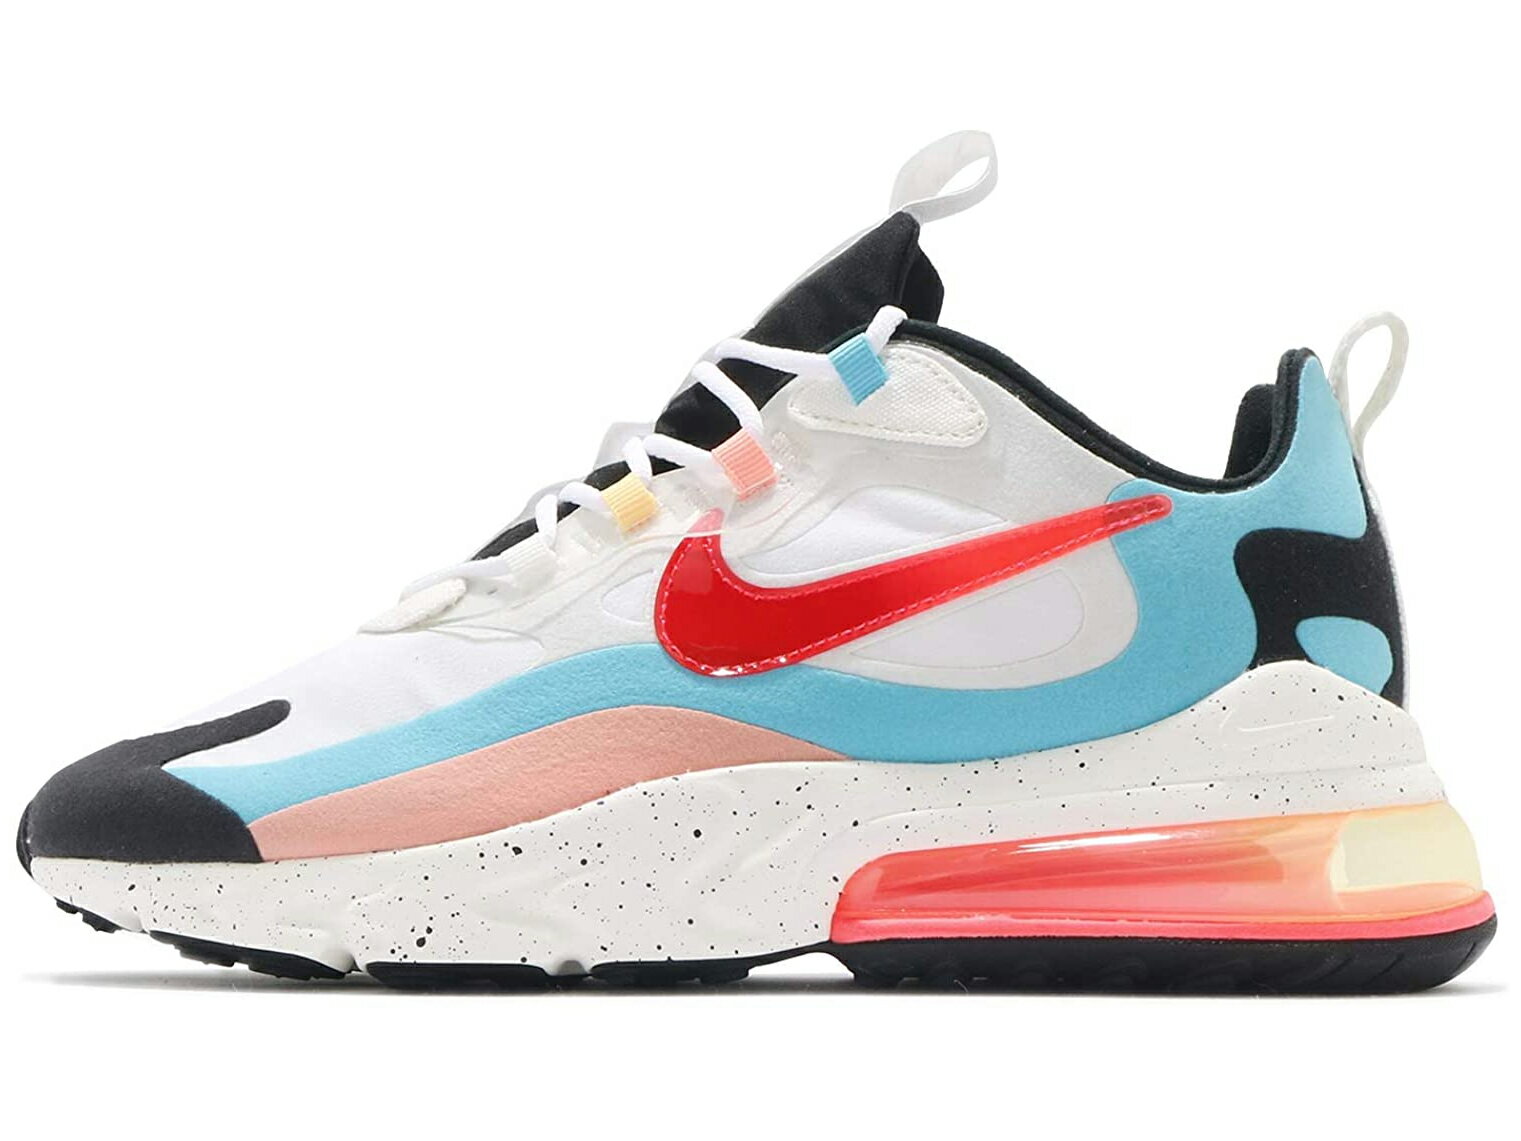 NIKE AIR MAX 270 REACT Future Is In The Airナイキ エア マックス 270 リアクト メンズ カジュアル シューズWHITE/INFRARED-SUMMIT WHITE 21-01-0255#70